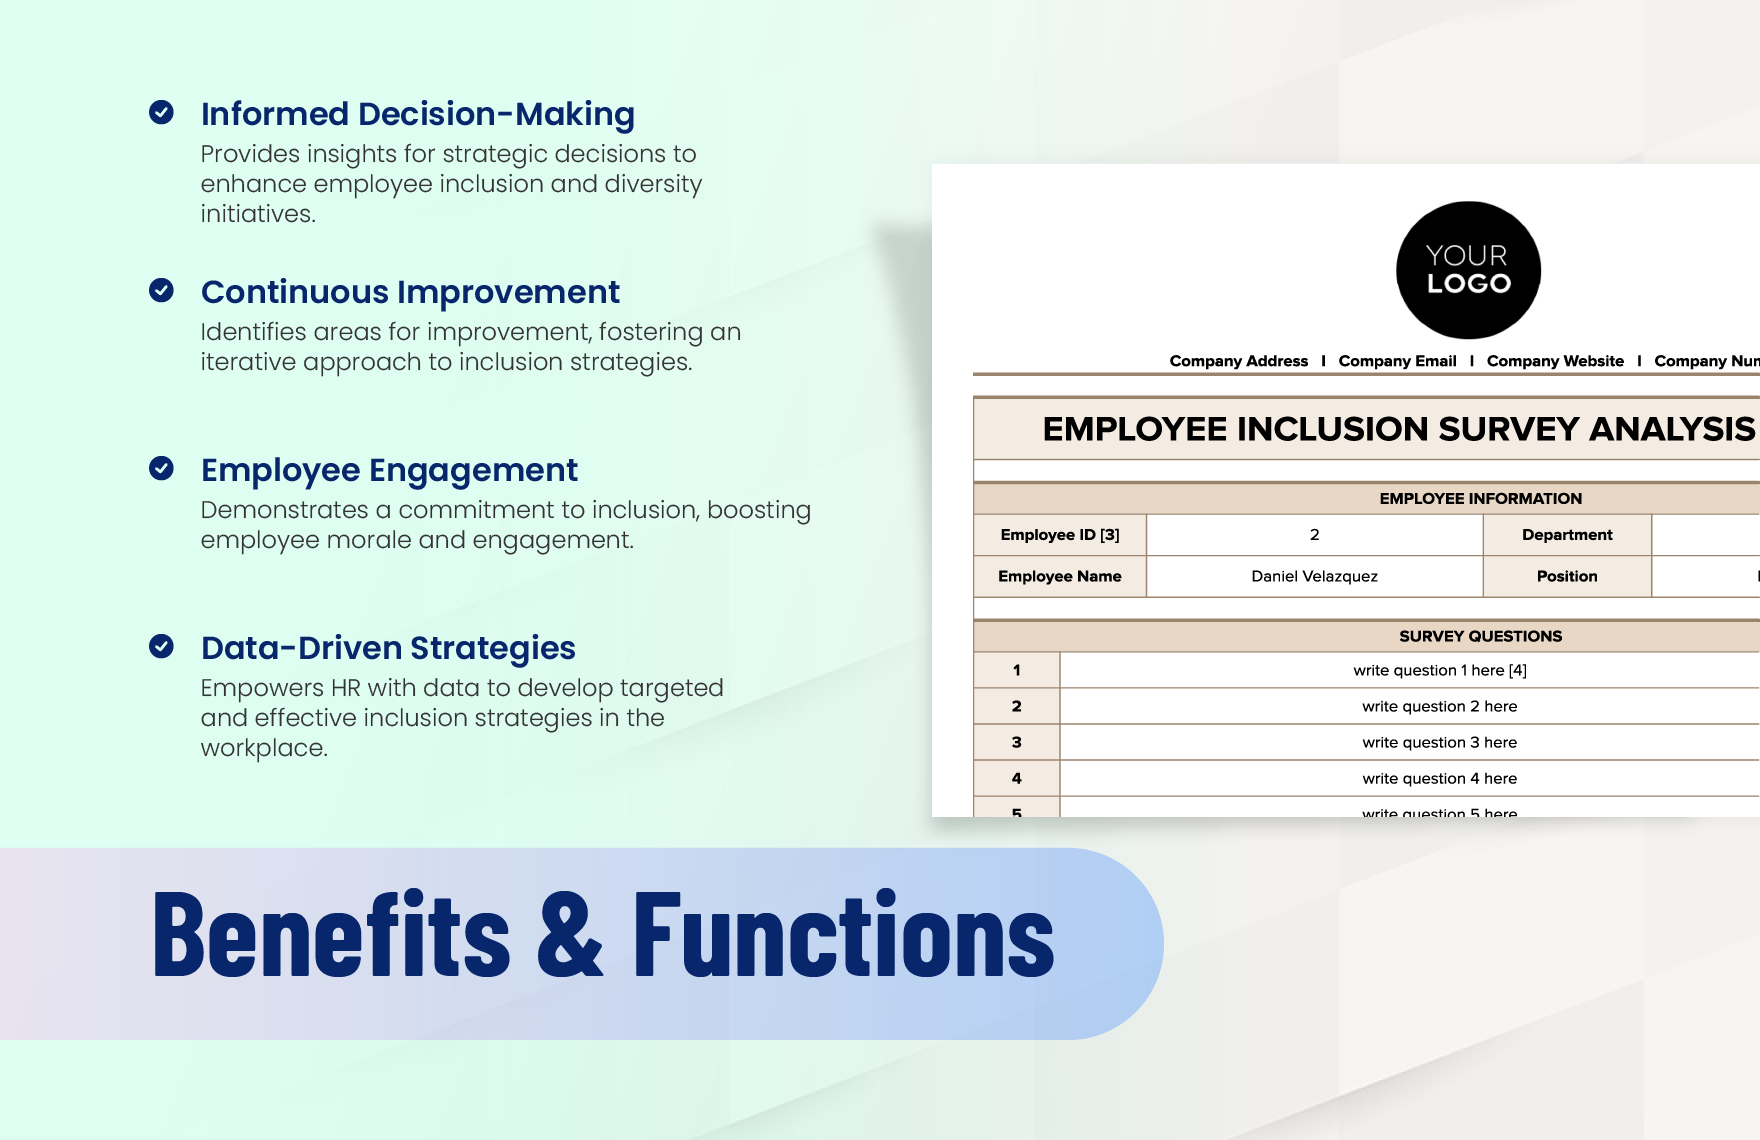 Employee Inclusion Survey Analysis Tool HR Template